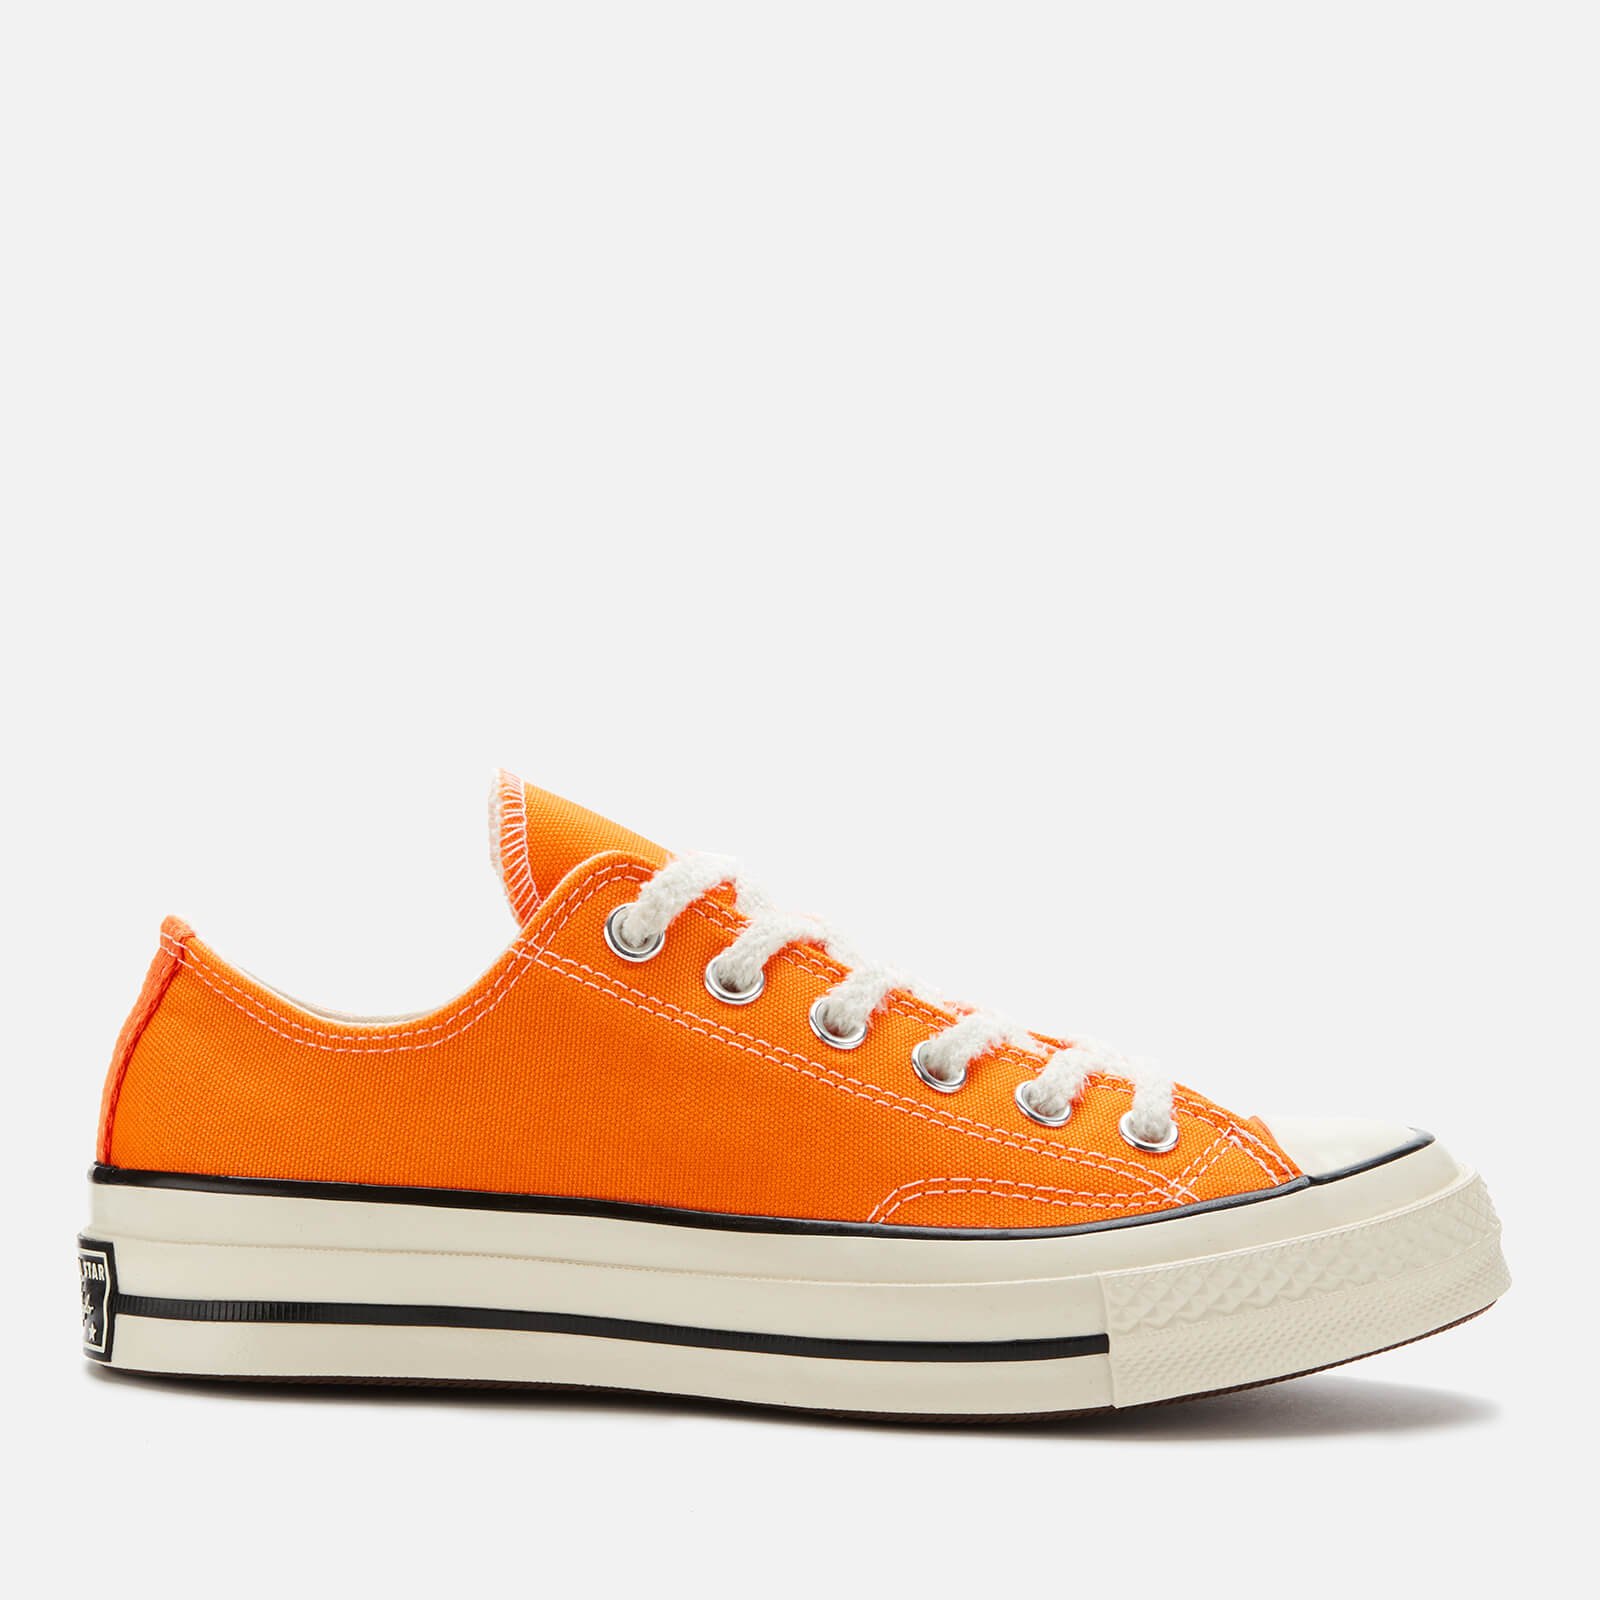 converse chuck taylor all star ox trainers in orange